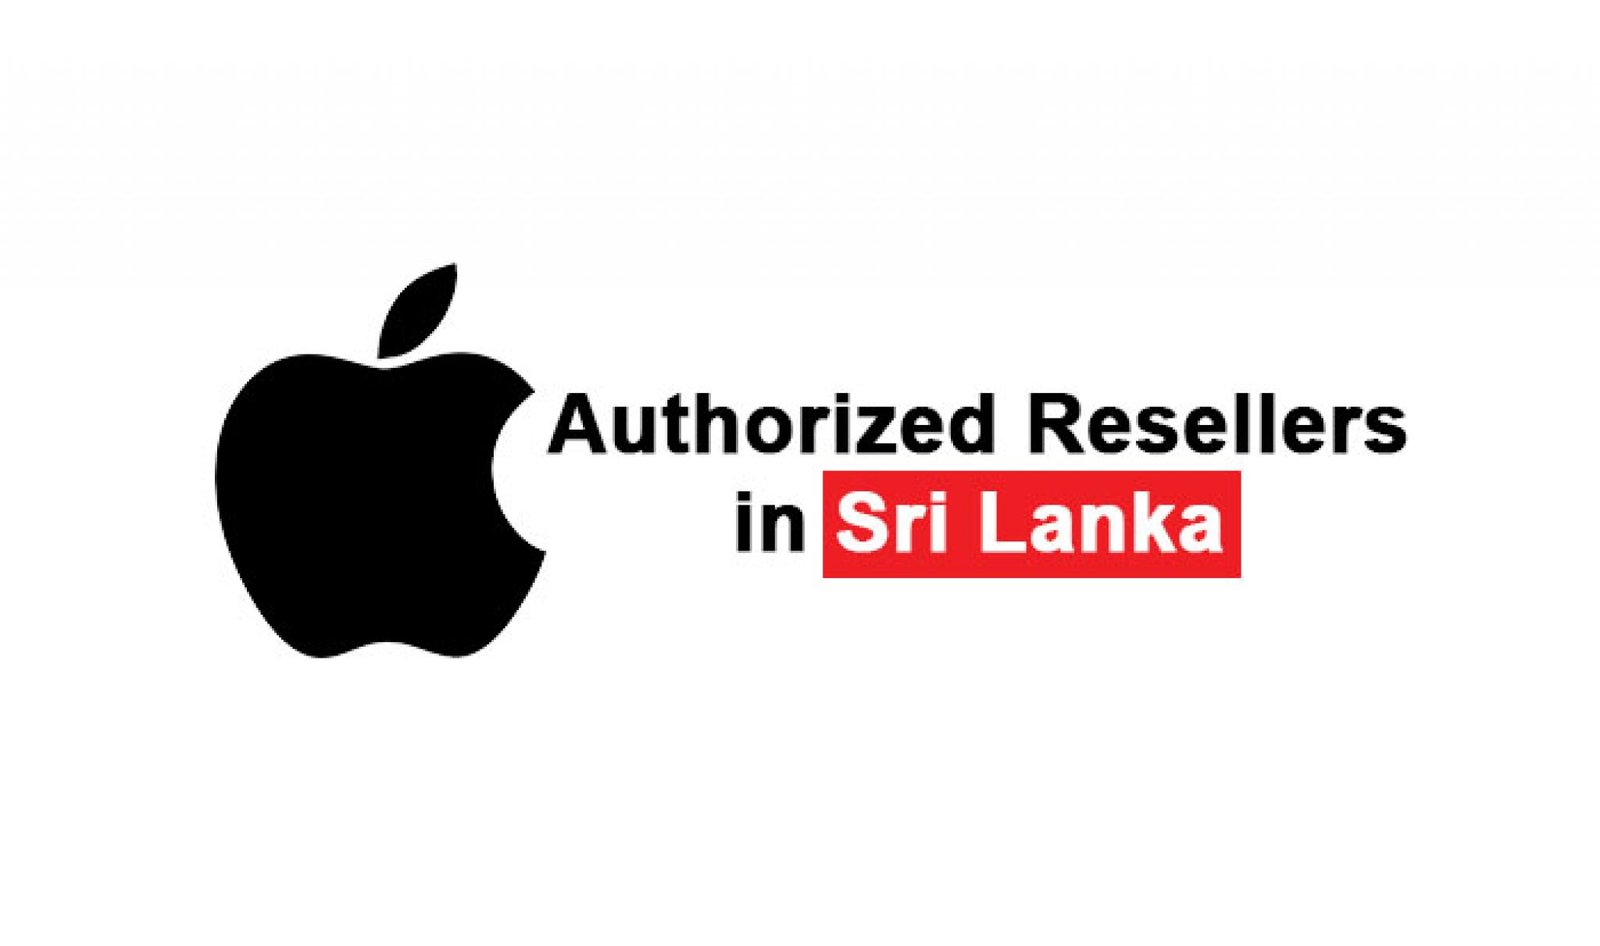 Apple Authorized Resellers in Sri Lanka